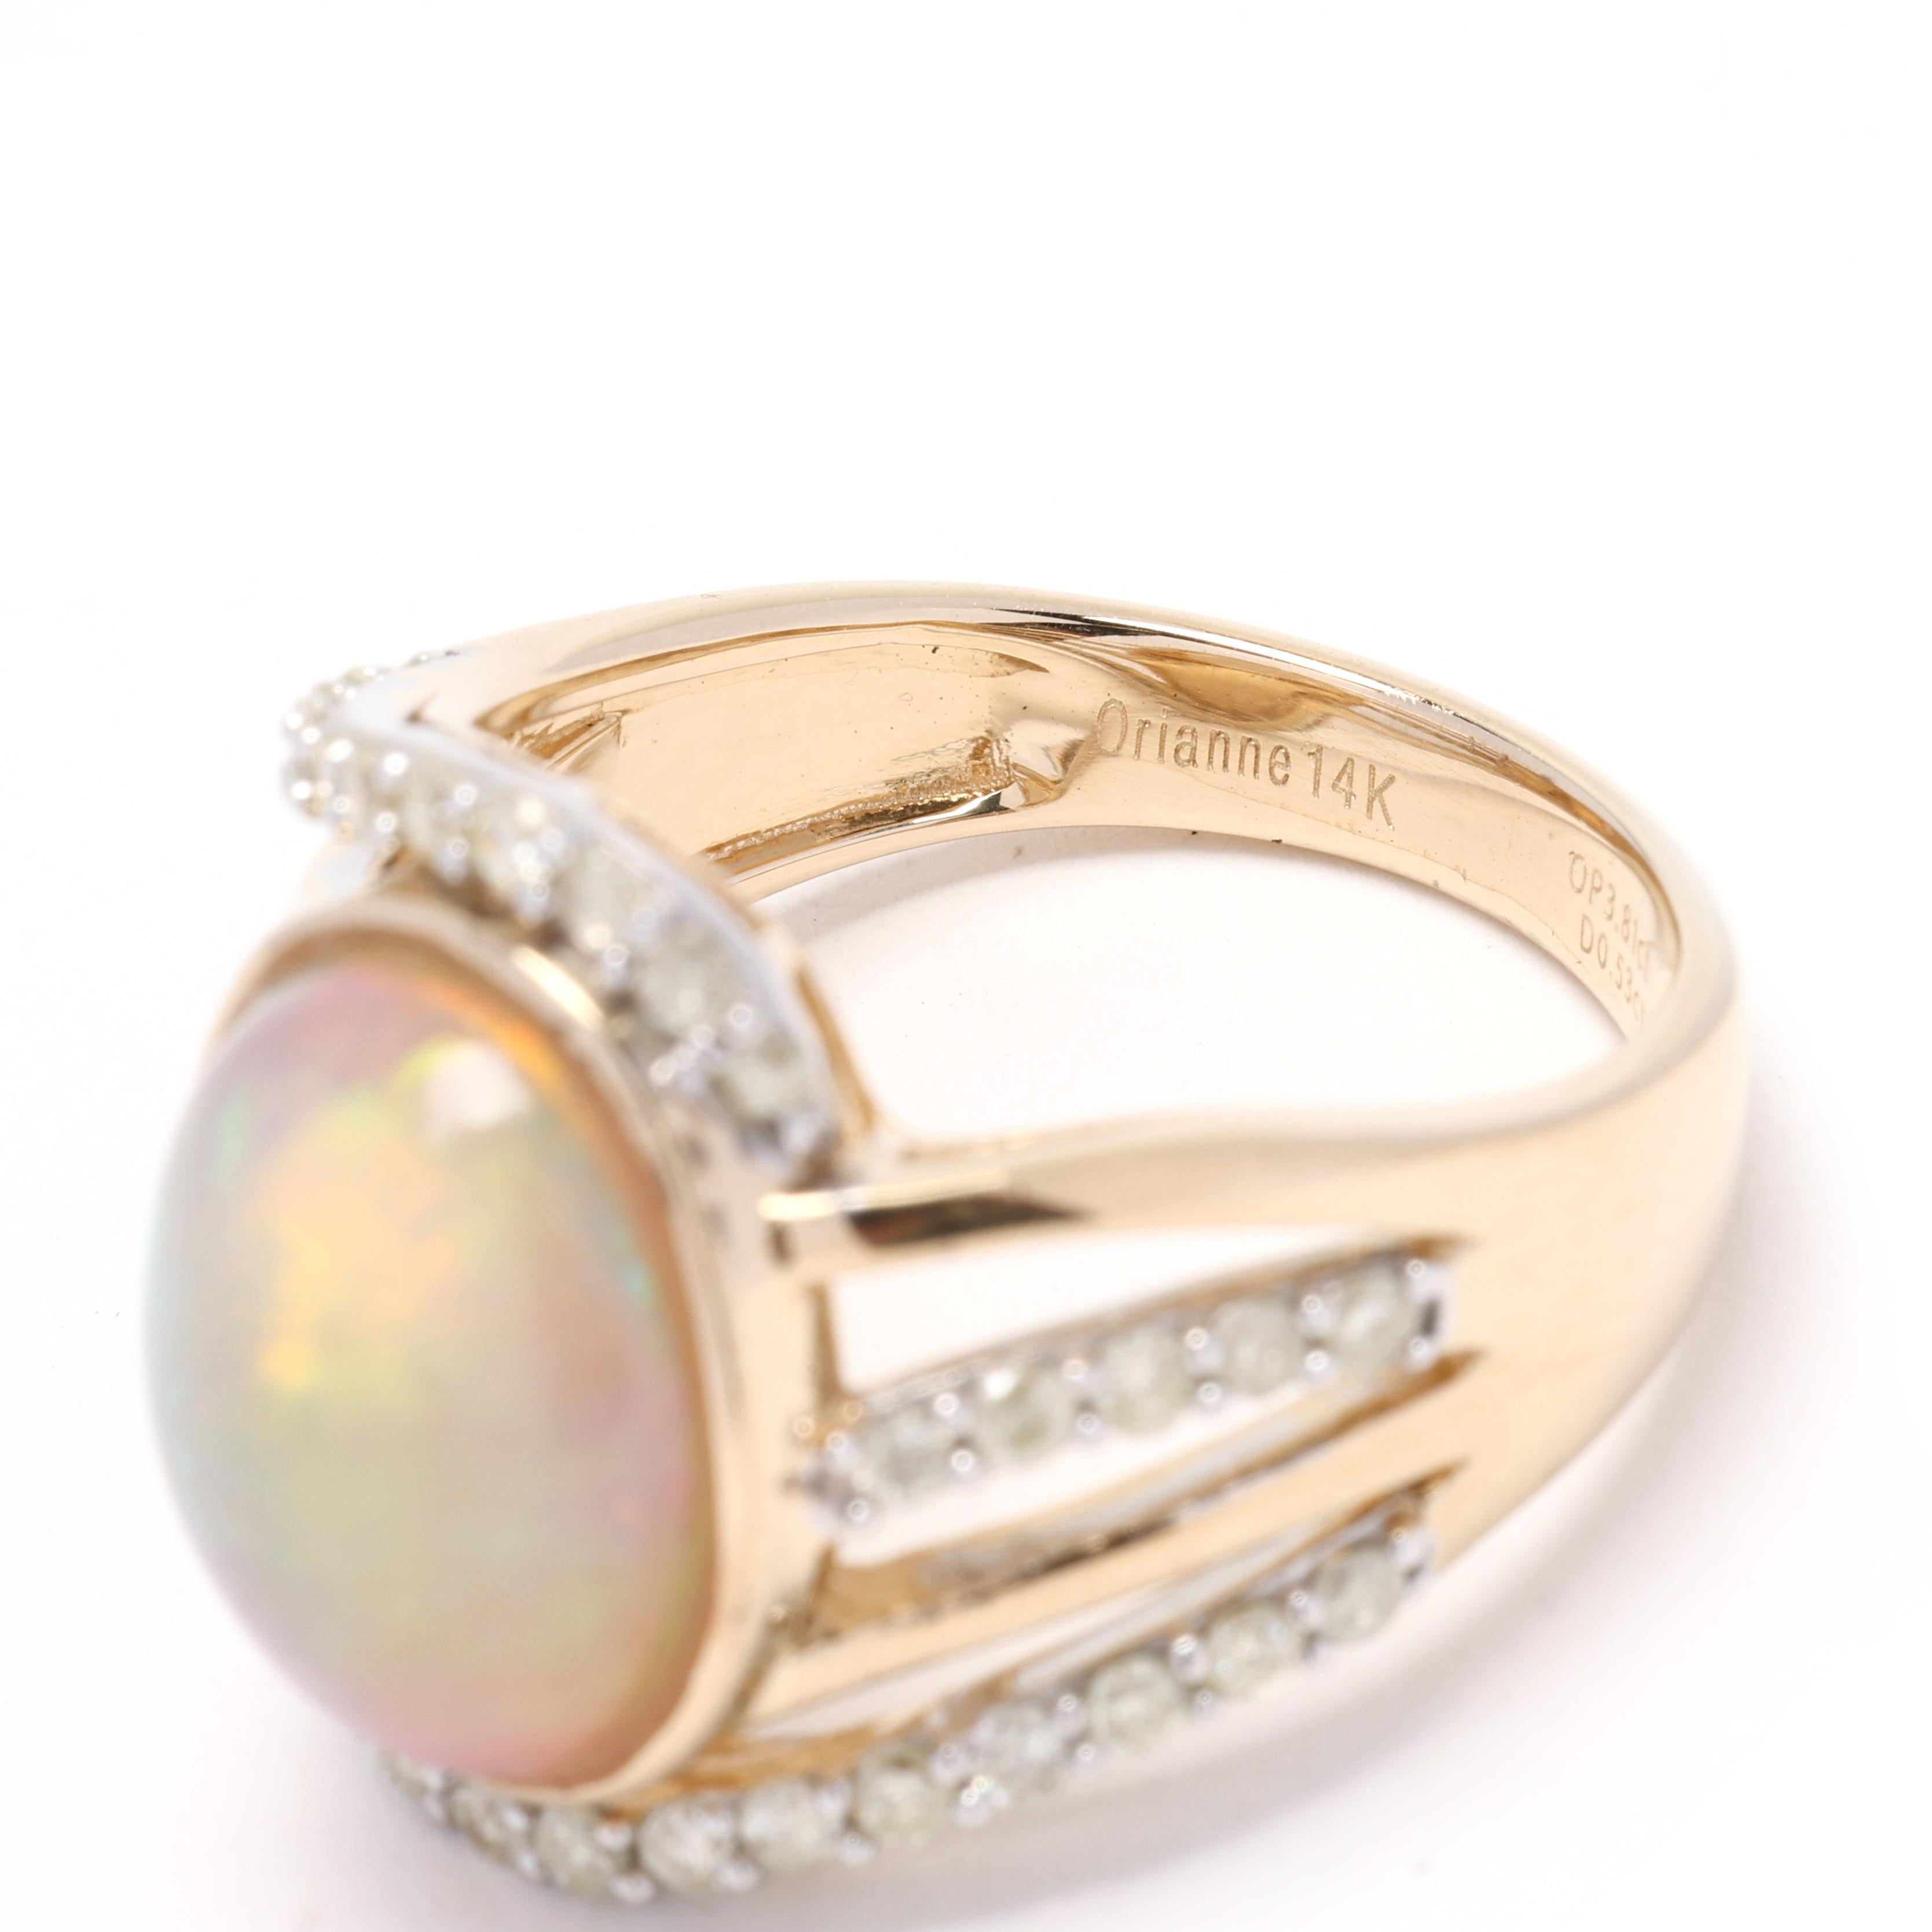 Women's or Men's Orianne Diamond and Opal Statement Ring, 14k Yellow Gold, Ring Size 7